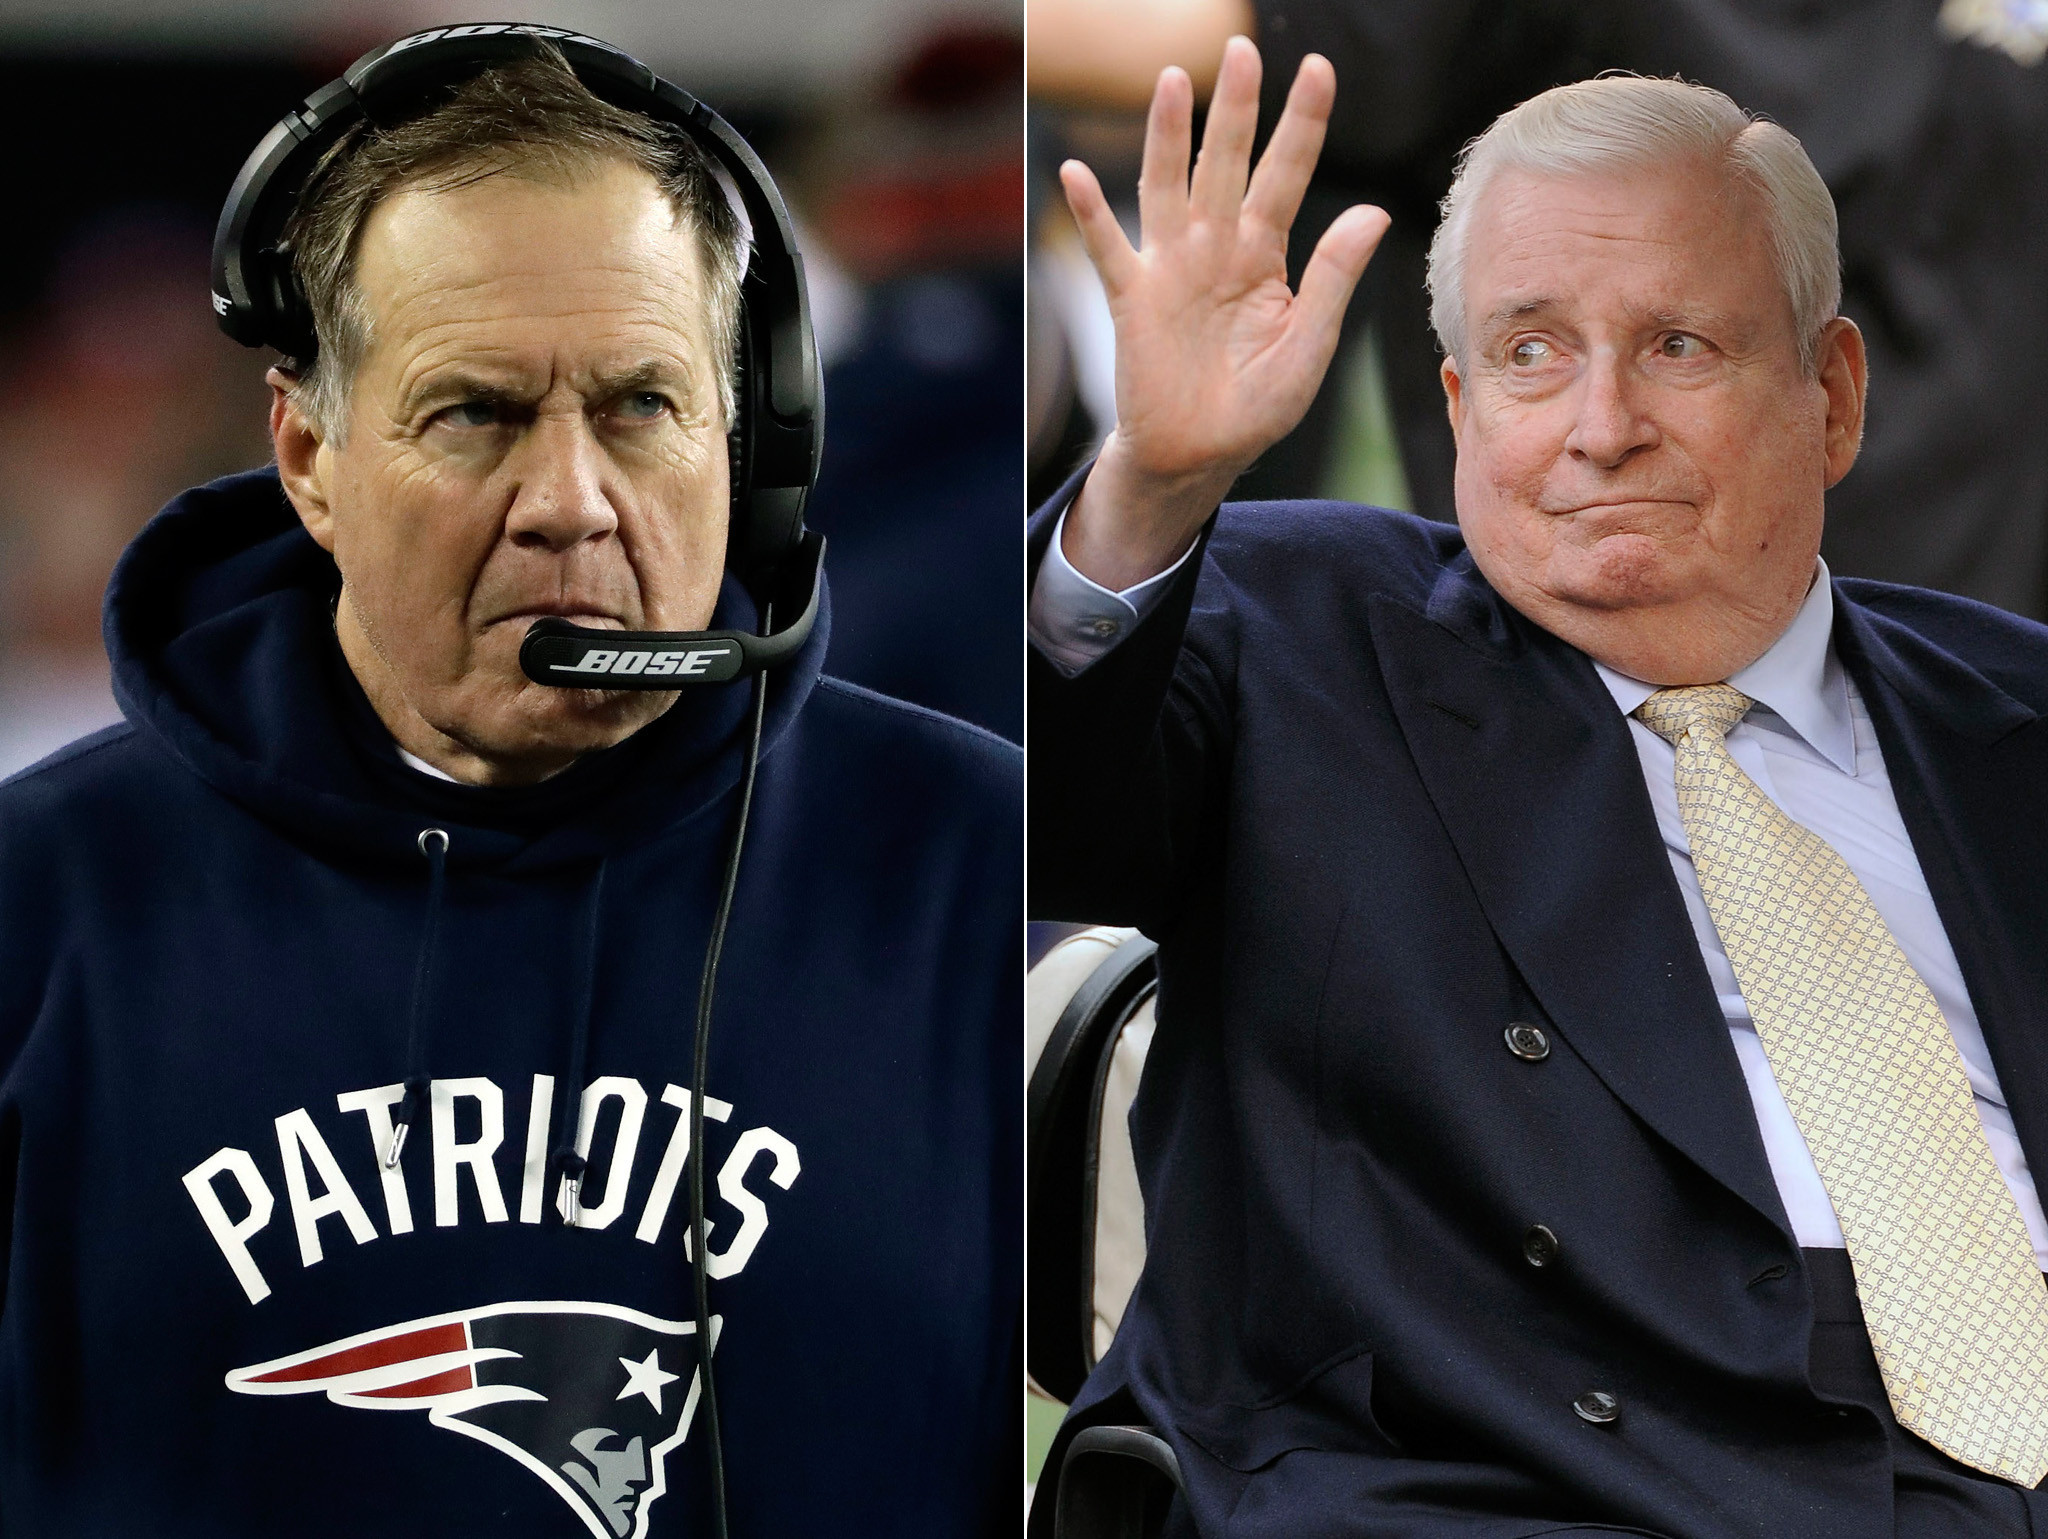 bal-patriots-owner-art-modell-said-hiring-bill-belichick-would-be-biggest-mistake-of-my-life-20170130